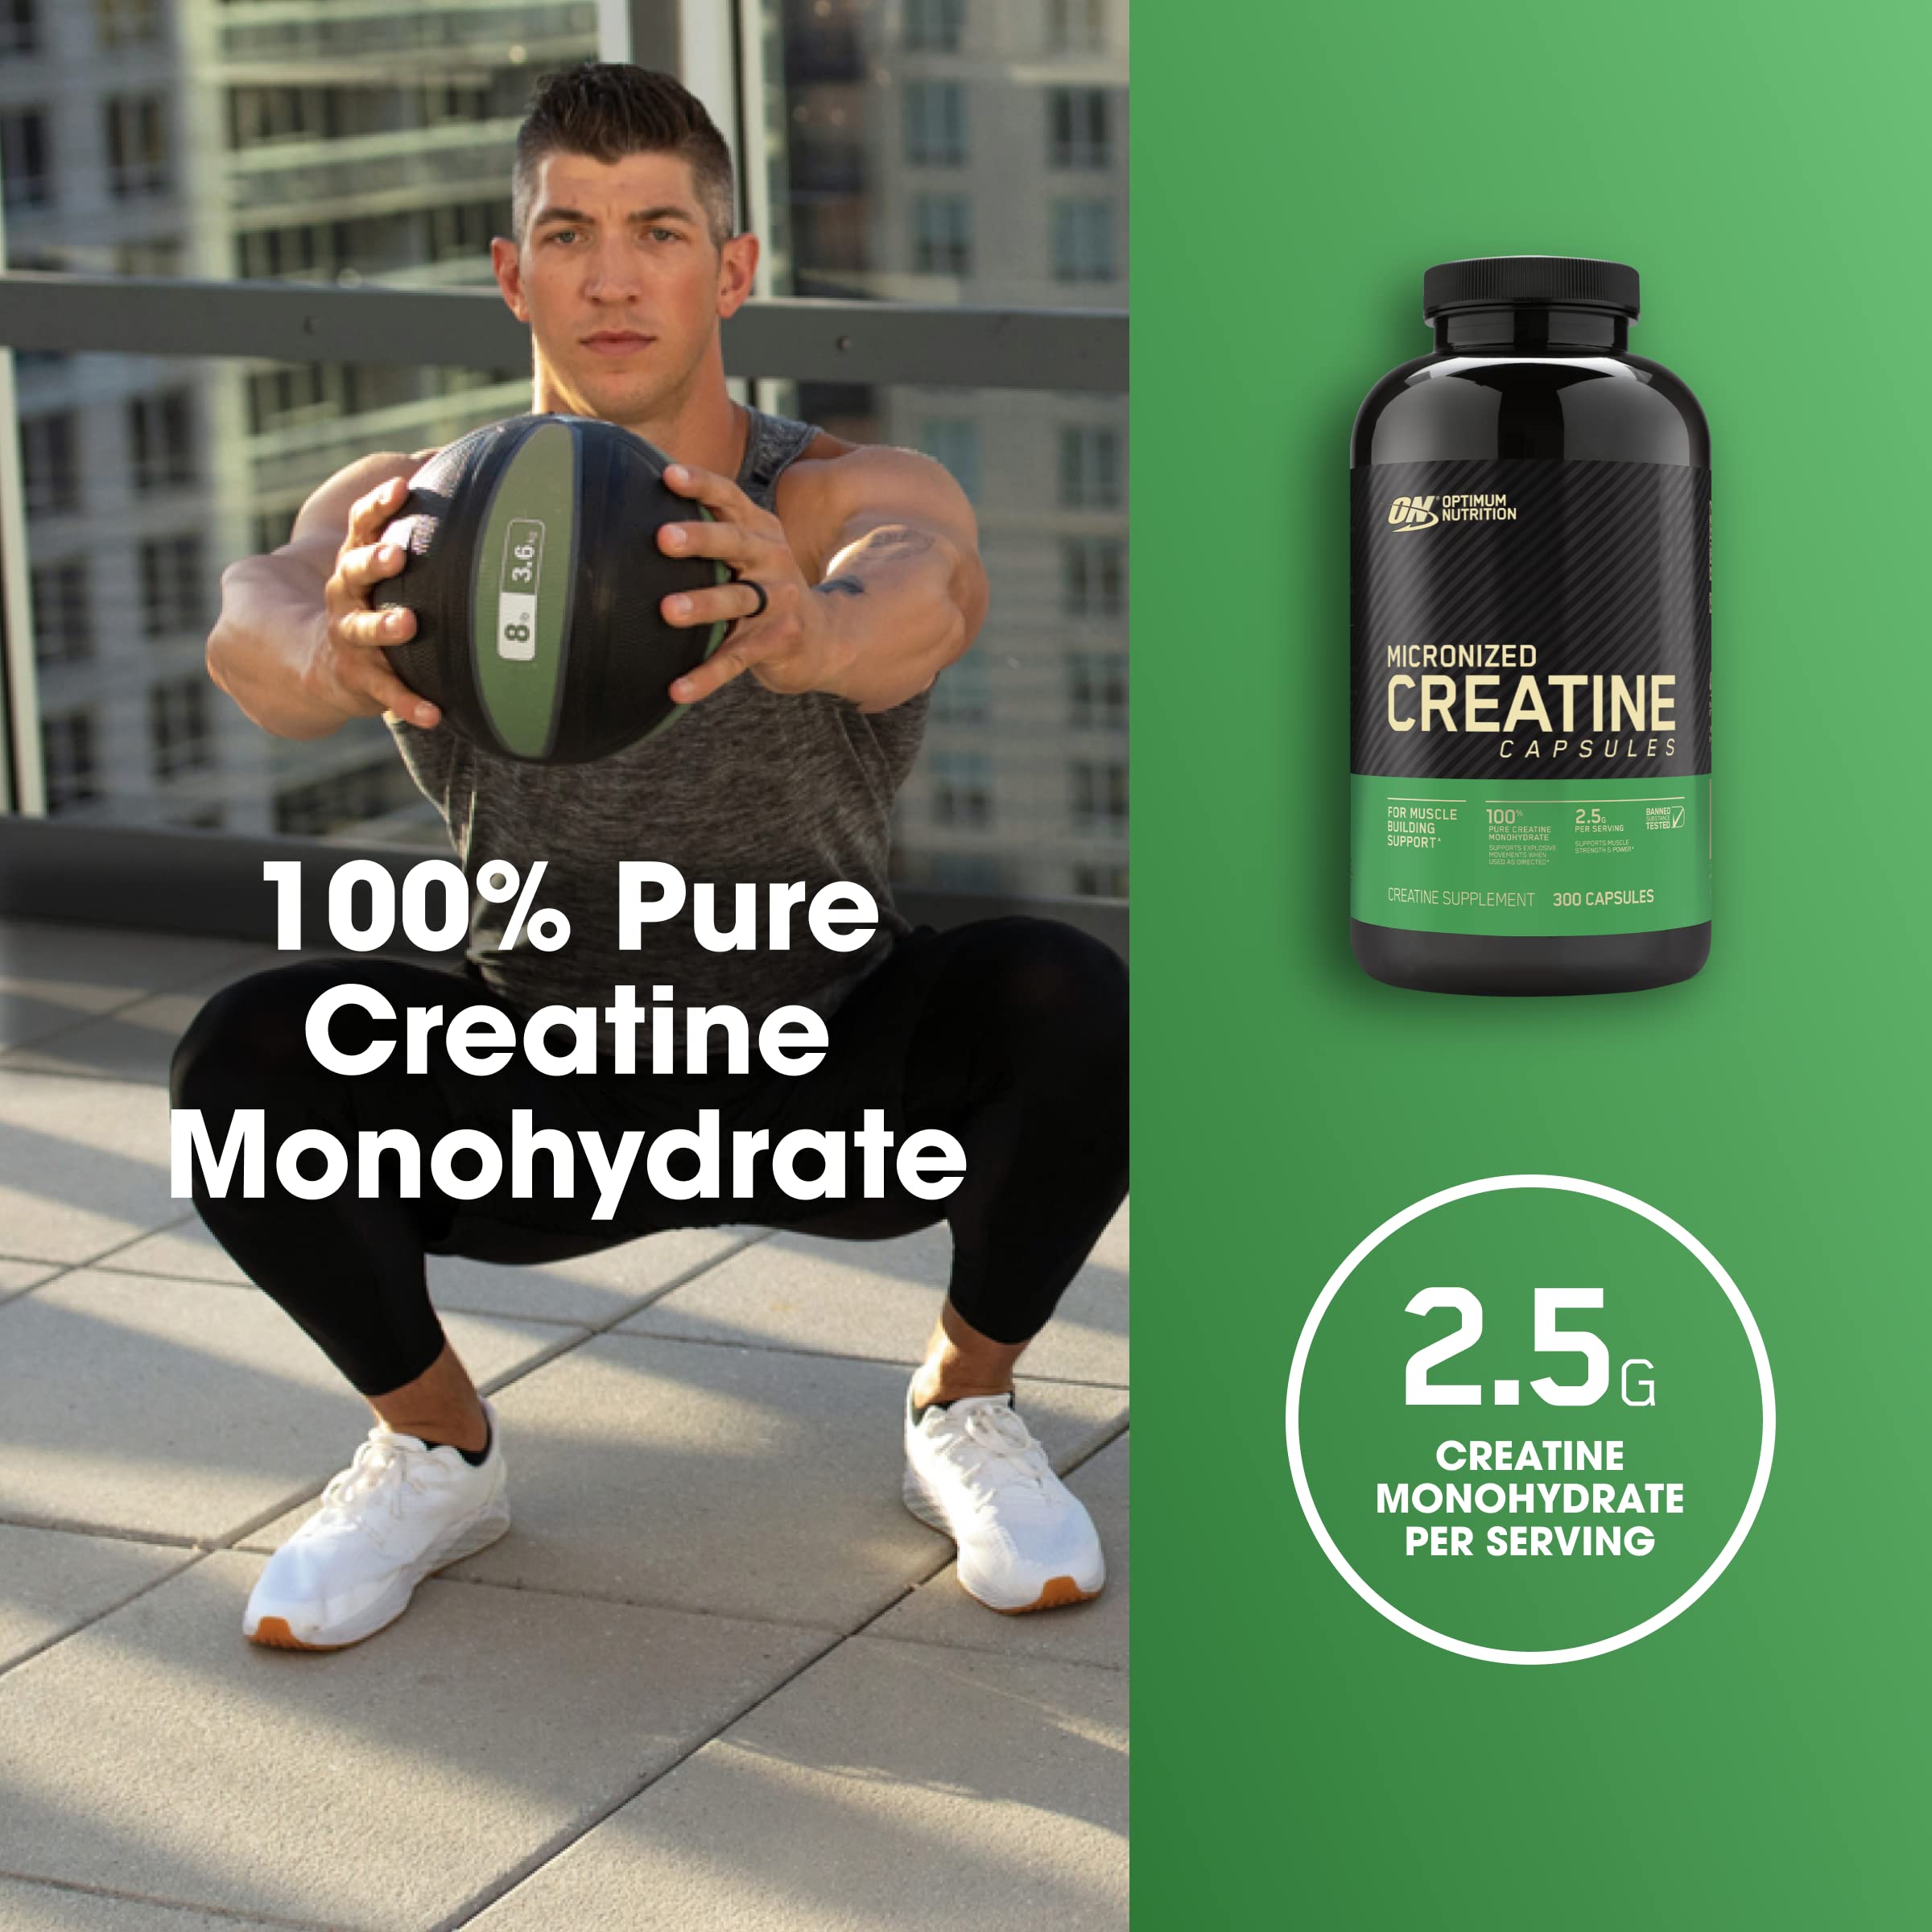 Optimum Nutrition Micronized Creatine Monohydrate Capsules, Keto Friendly, 2500mg, 300 Capsules (Packaging May Vary) & Instantized BCAA Capsules, Keto Friendly Branched Chain Essential Amino Acids